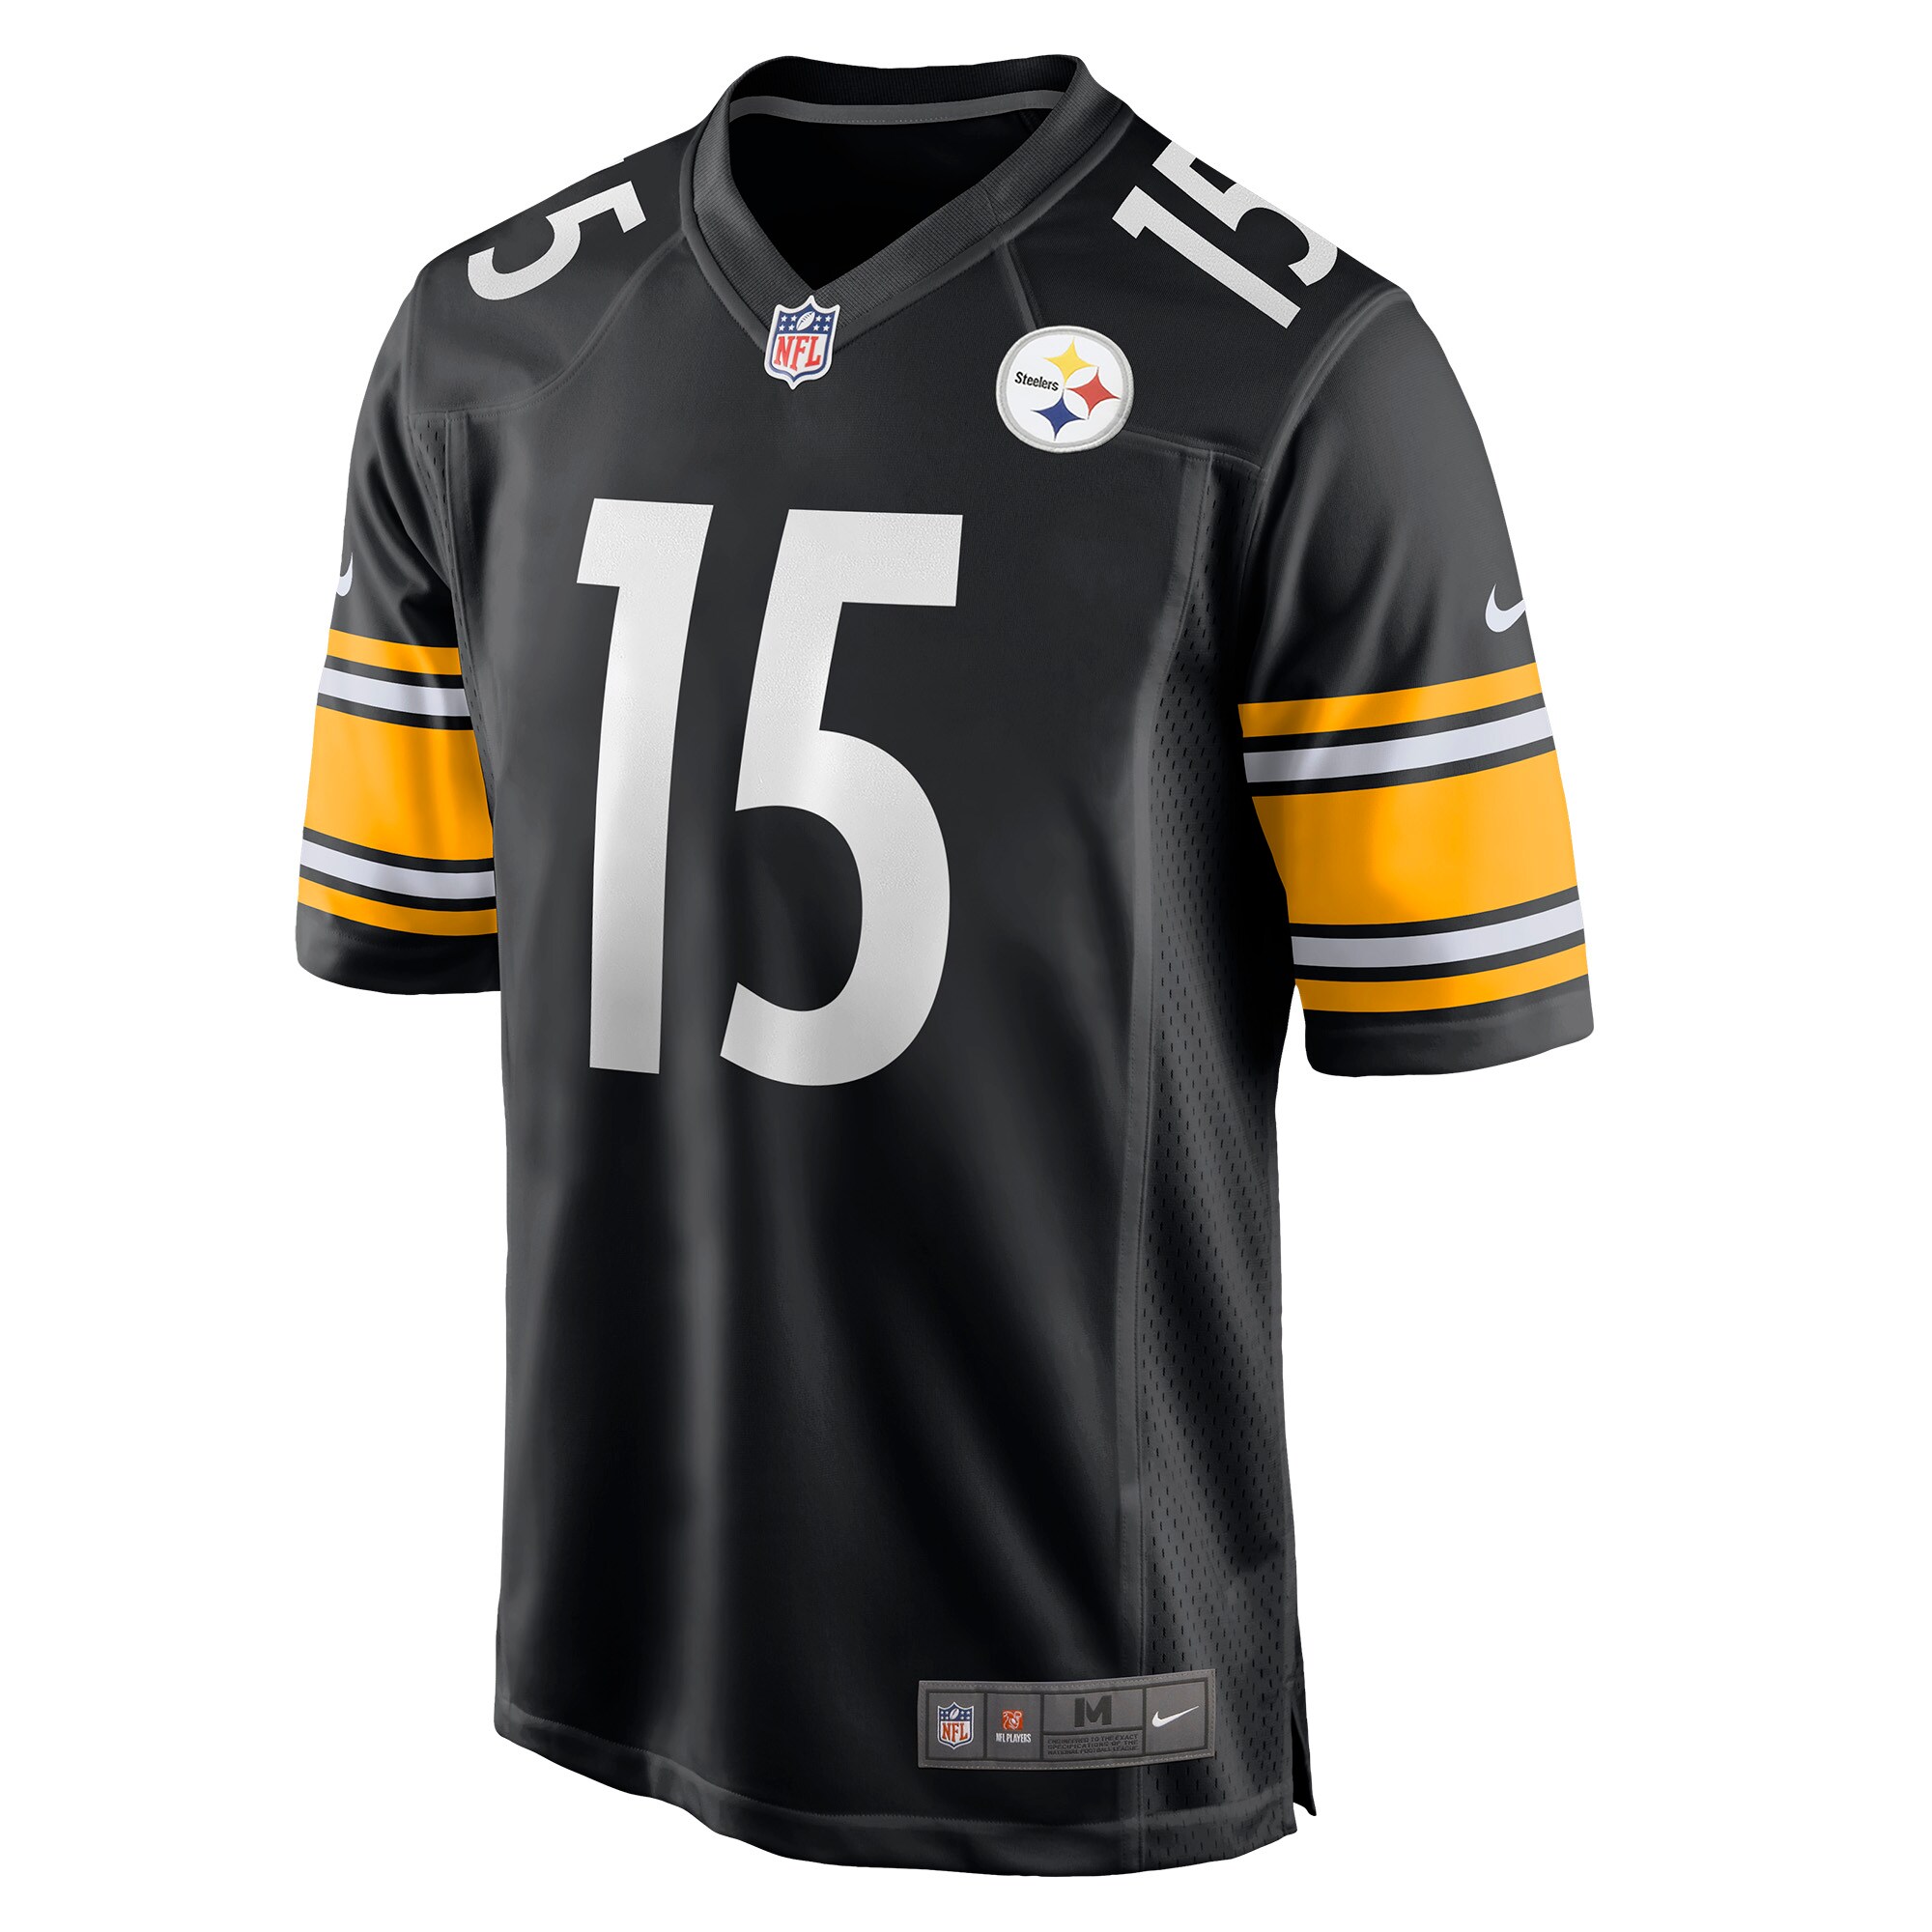 Men's Pittsburgh Steelers Jerseys Black Cody White Game Style